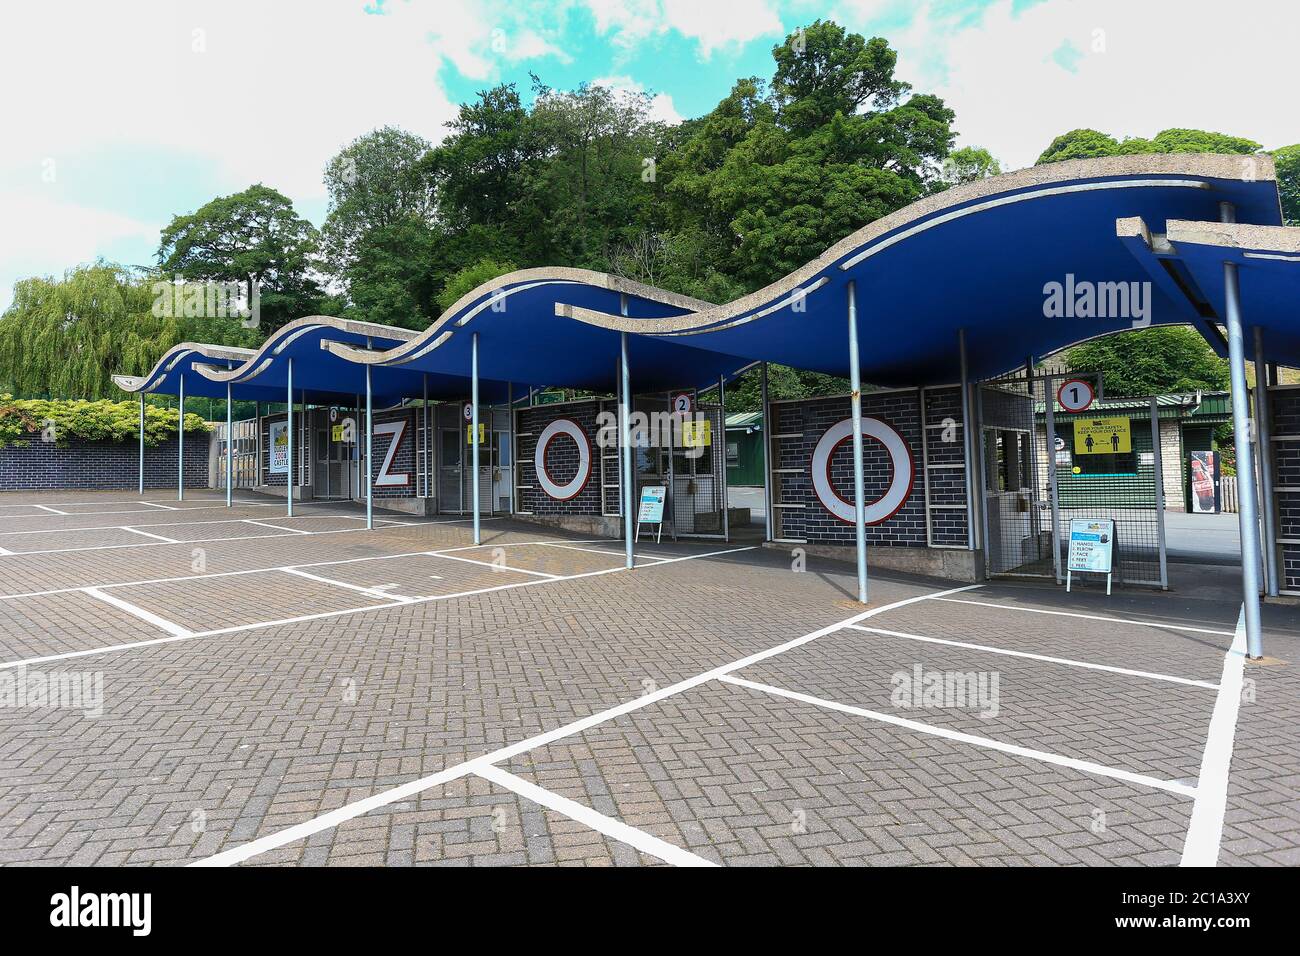 Dudley, West Midlands, UK. 15th June, 2020. Dudley zoo opens its doors for the first time since the UK's lockdown, with a managed intake and full safety arangements. Credit: Peter Lopeman/Alamy Live News Stock Photo